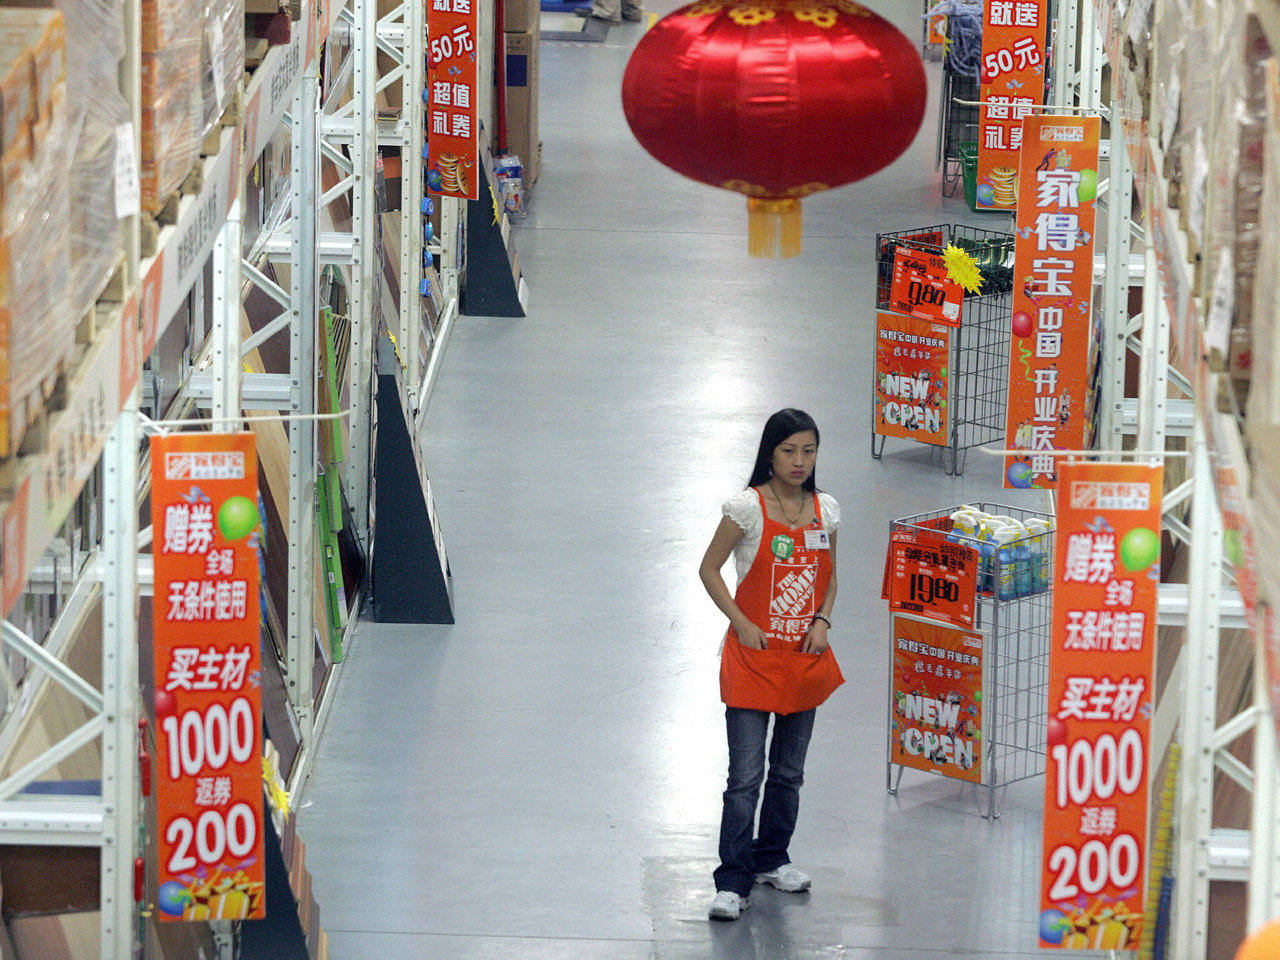 Home Depot shuttering last big box stores in China - CBS News